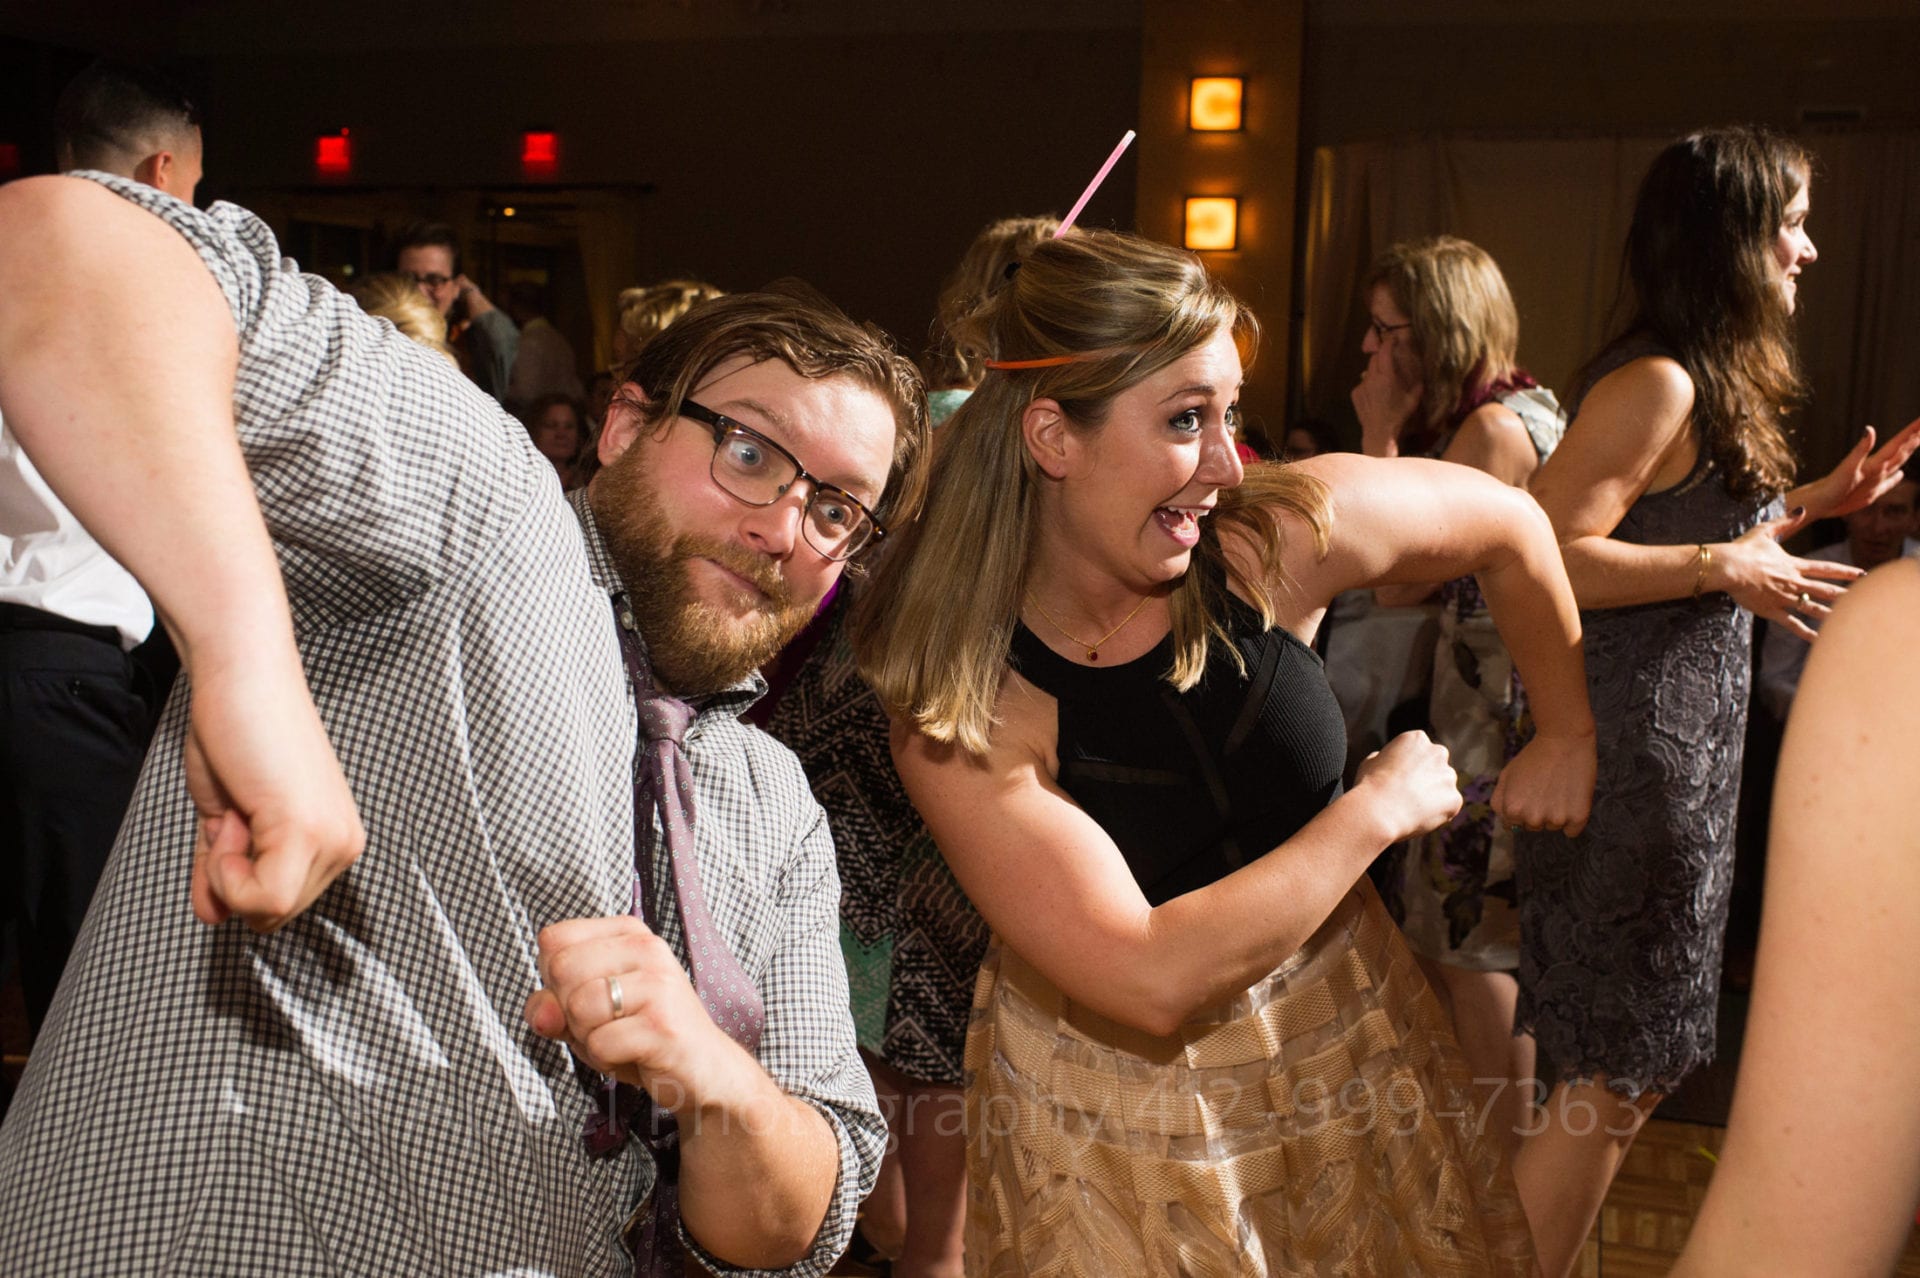 A couple dances together with amused faces as they throw their elbows into the air during a Heinz History Center wedding.